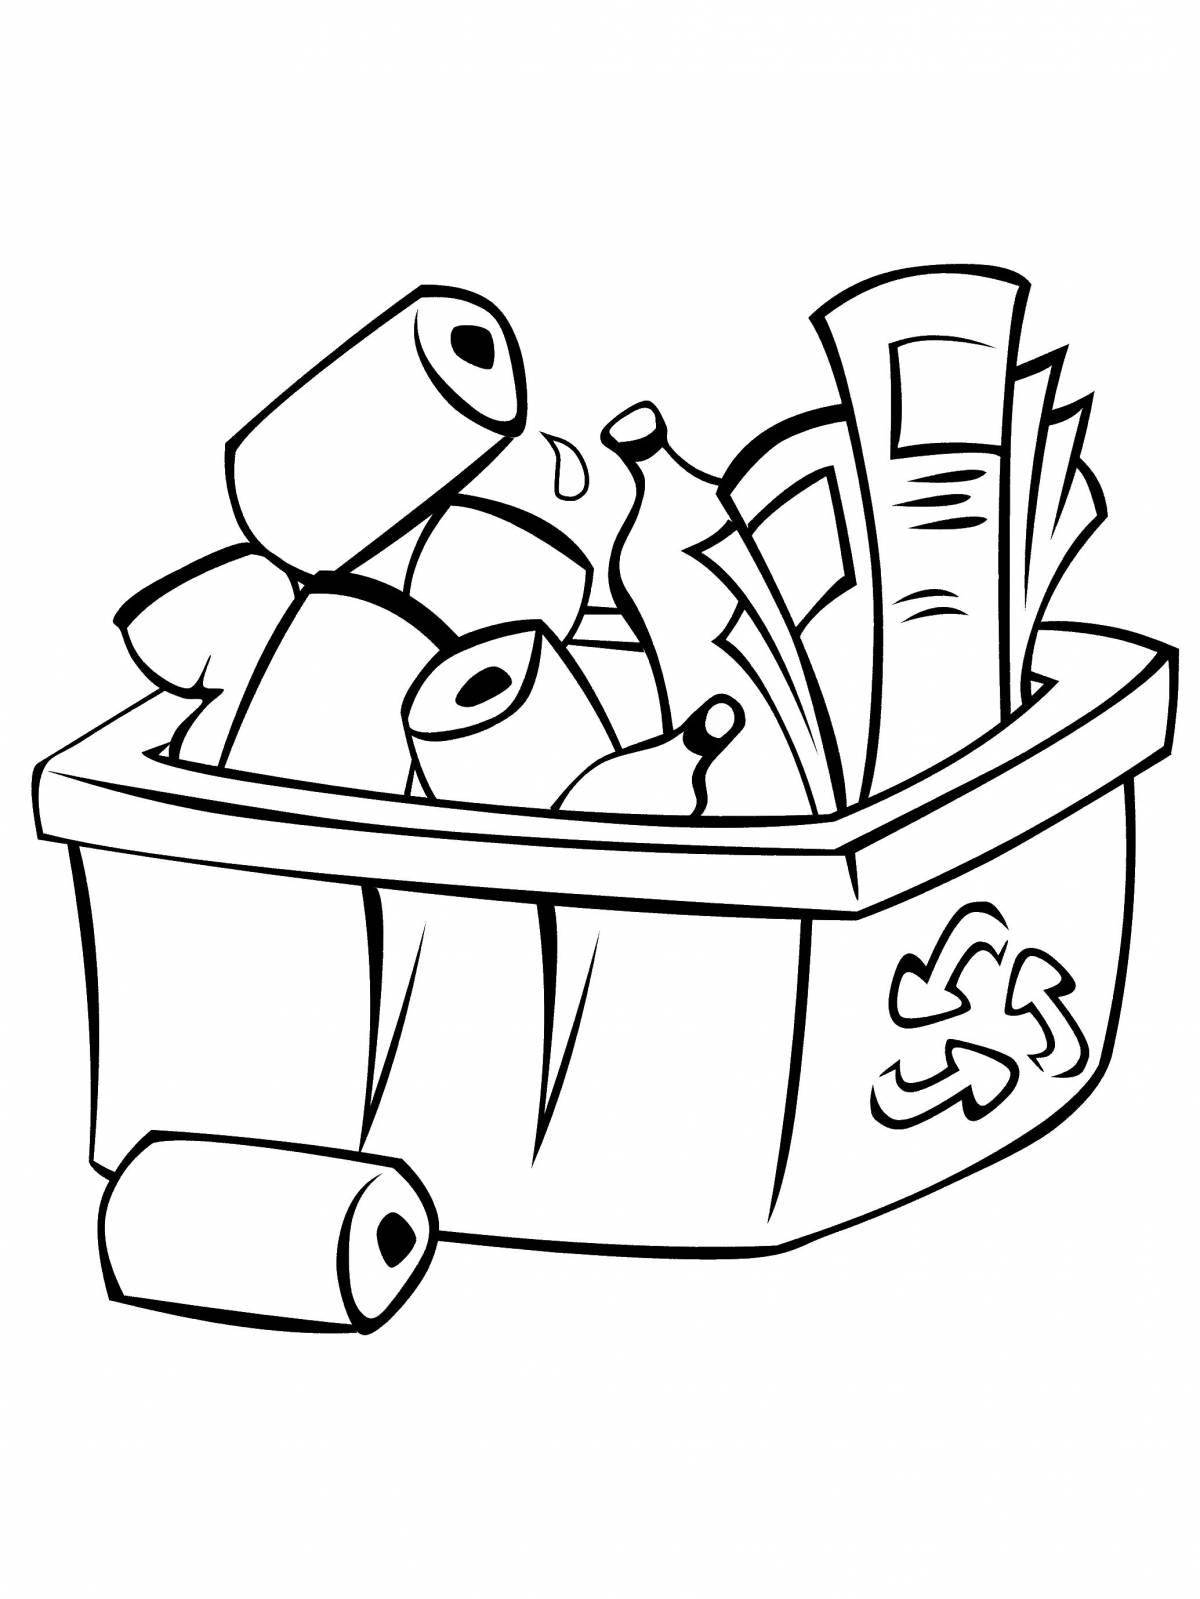 Fun sorting coloring book for little ones